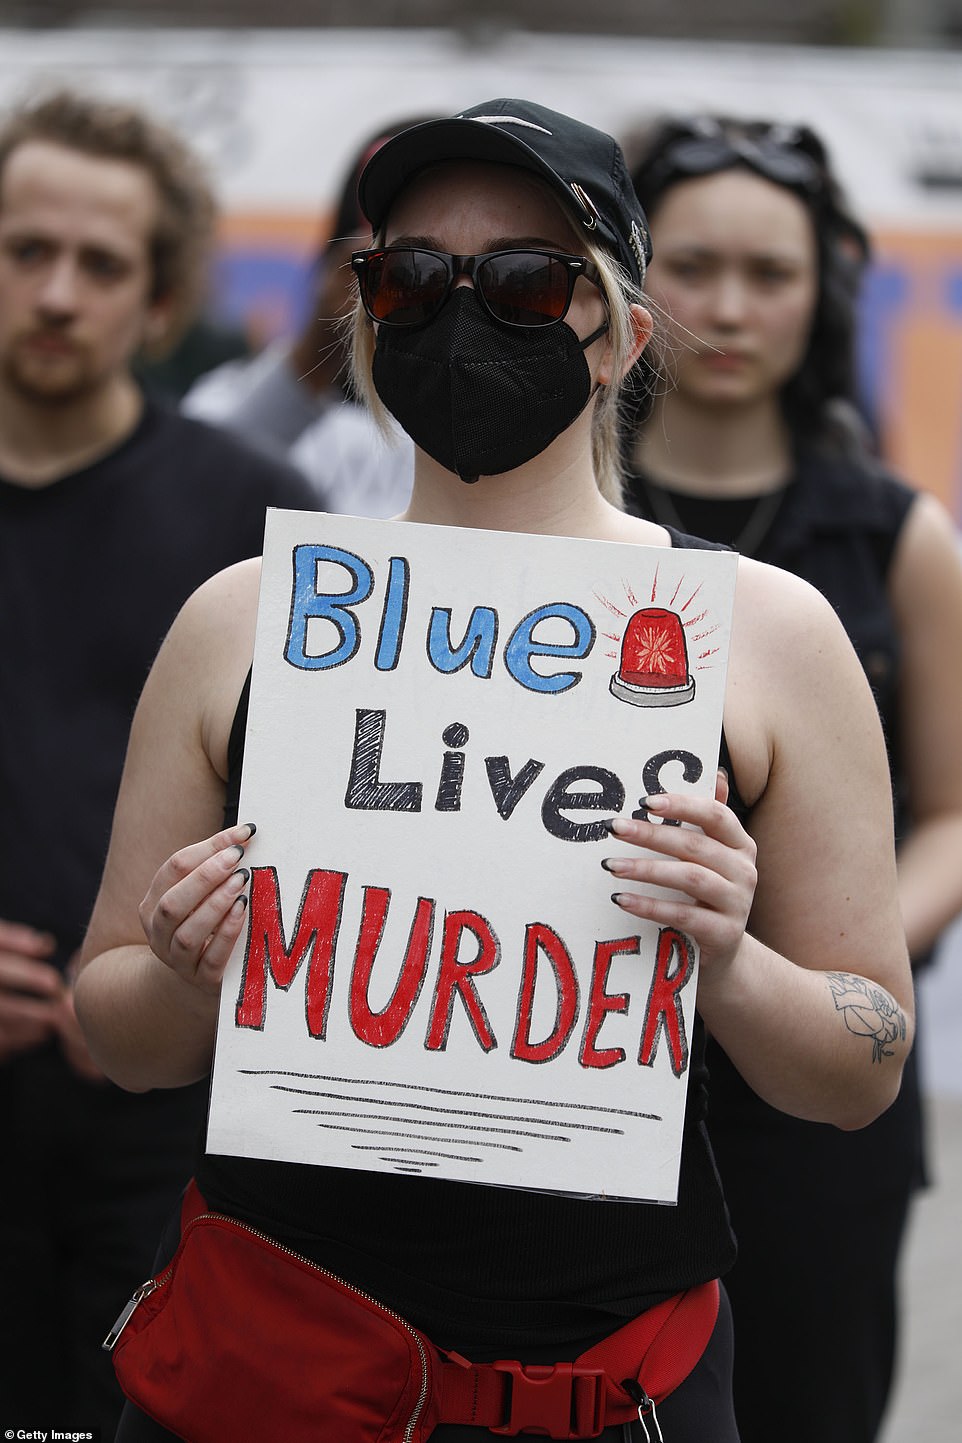 Protesters hold signs that read 'Blue Lives Murder' following the fatal shooting of Lyoya